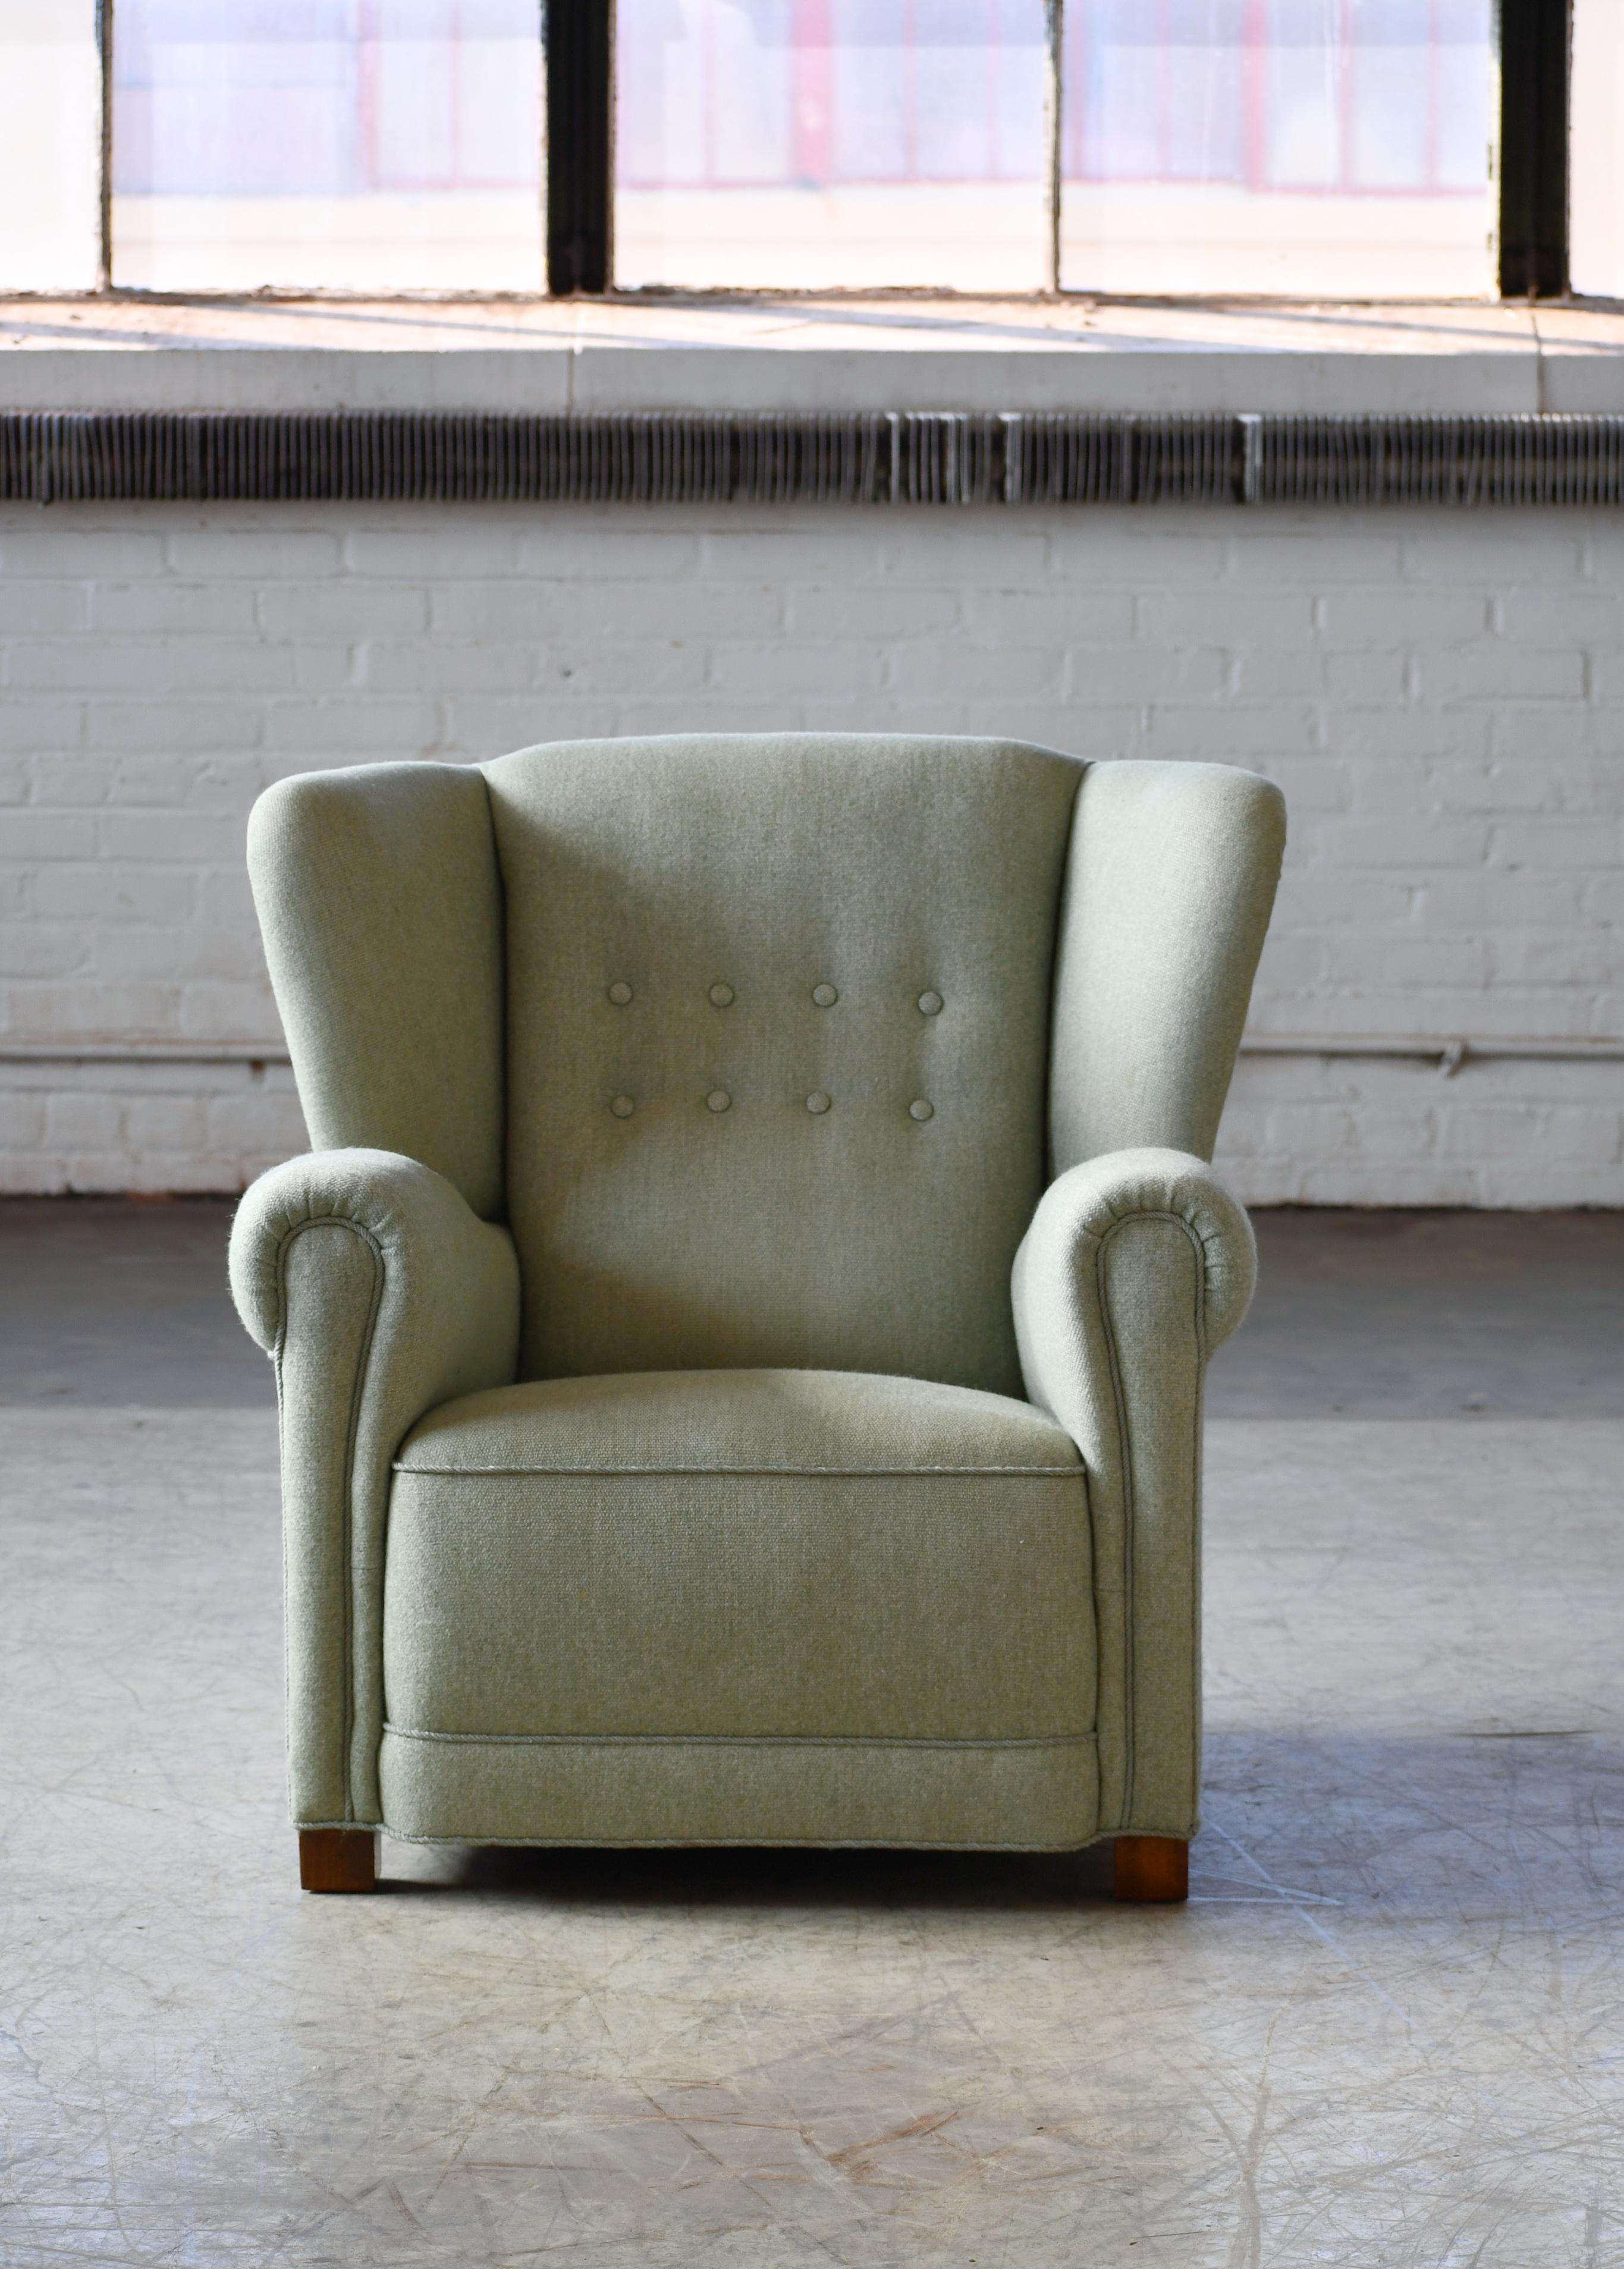 Superb and unique Classic Danish 1940s club chair in the style of Fritz Hansen. The chair has a nice stance and strong presence and is solid and sturdy while being superbly comfortable with coil springs in the seat and cushion. Overall very good